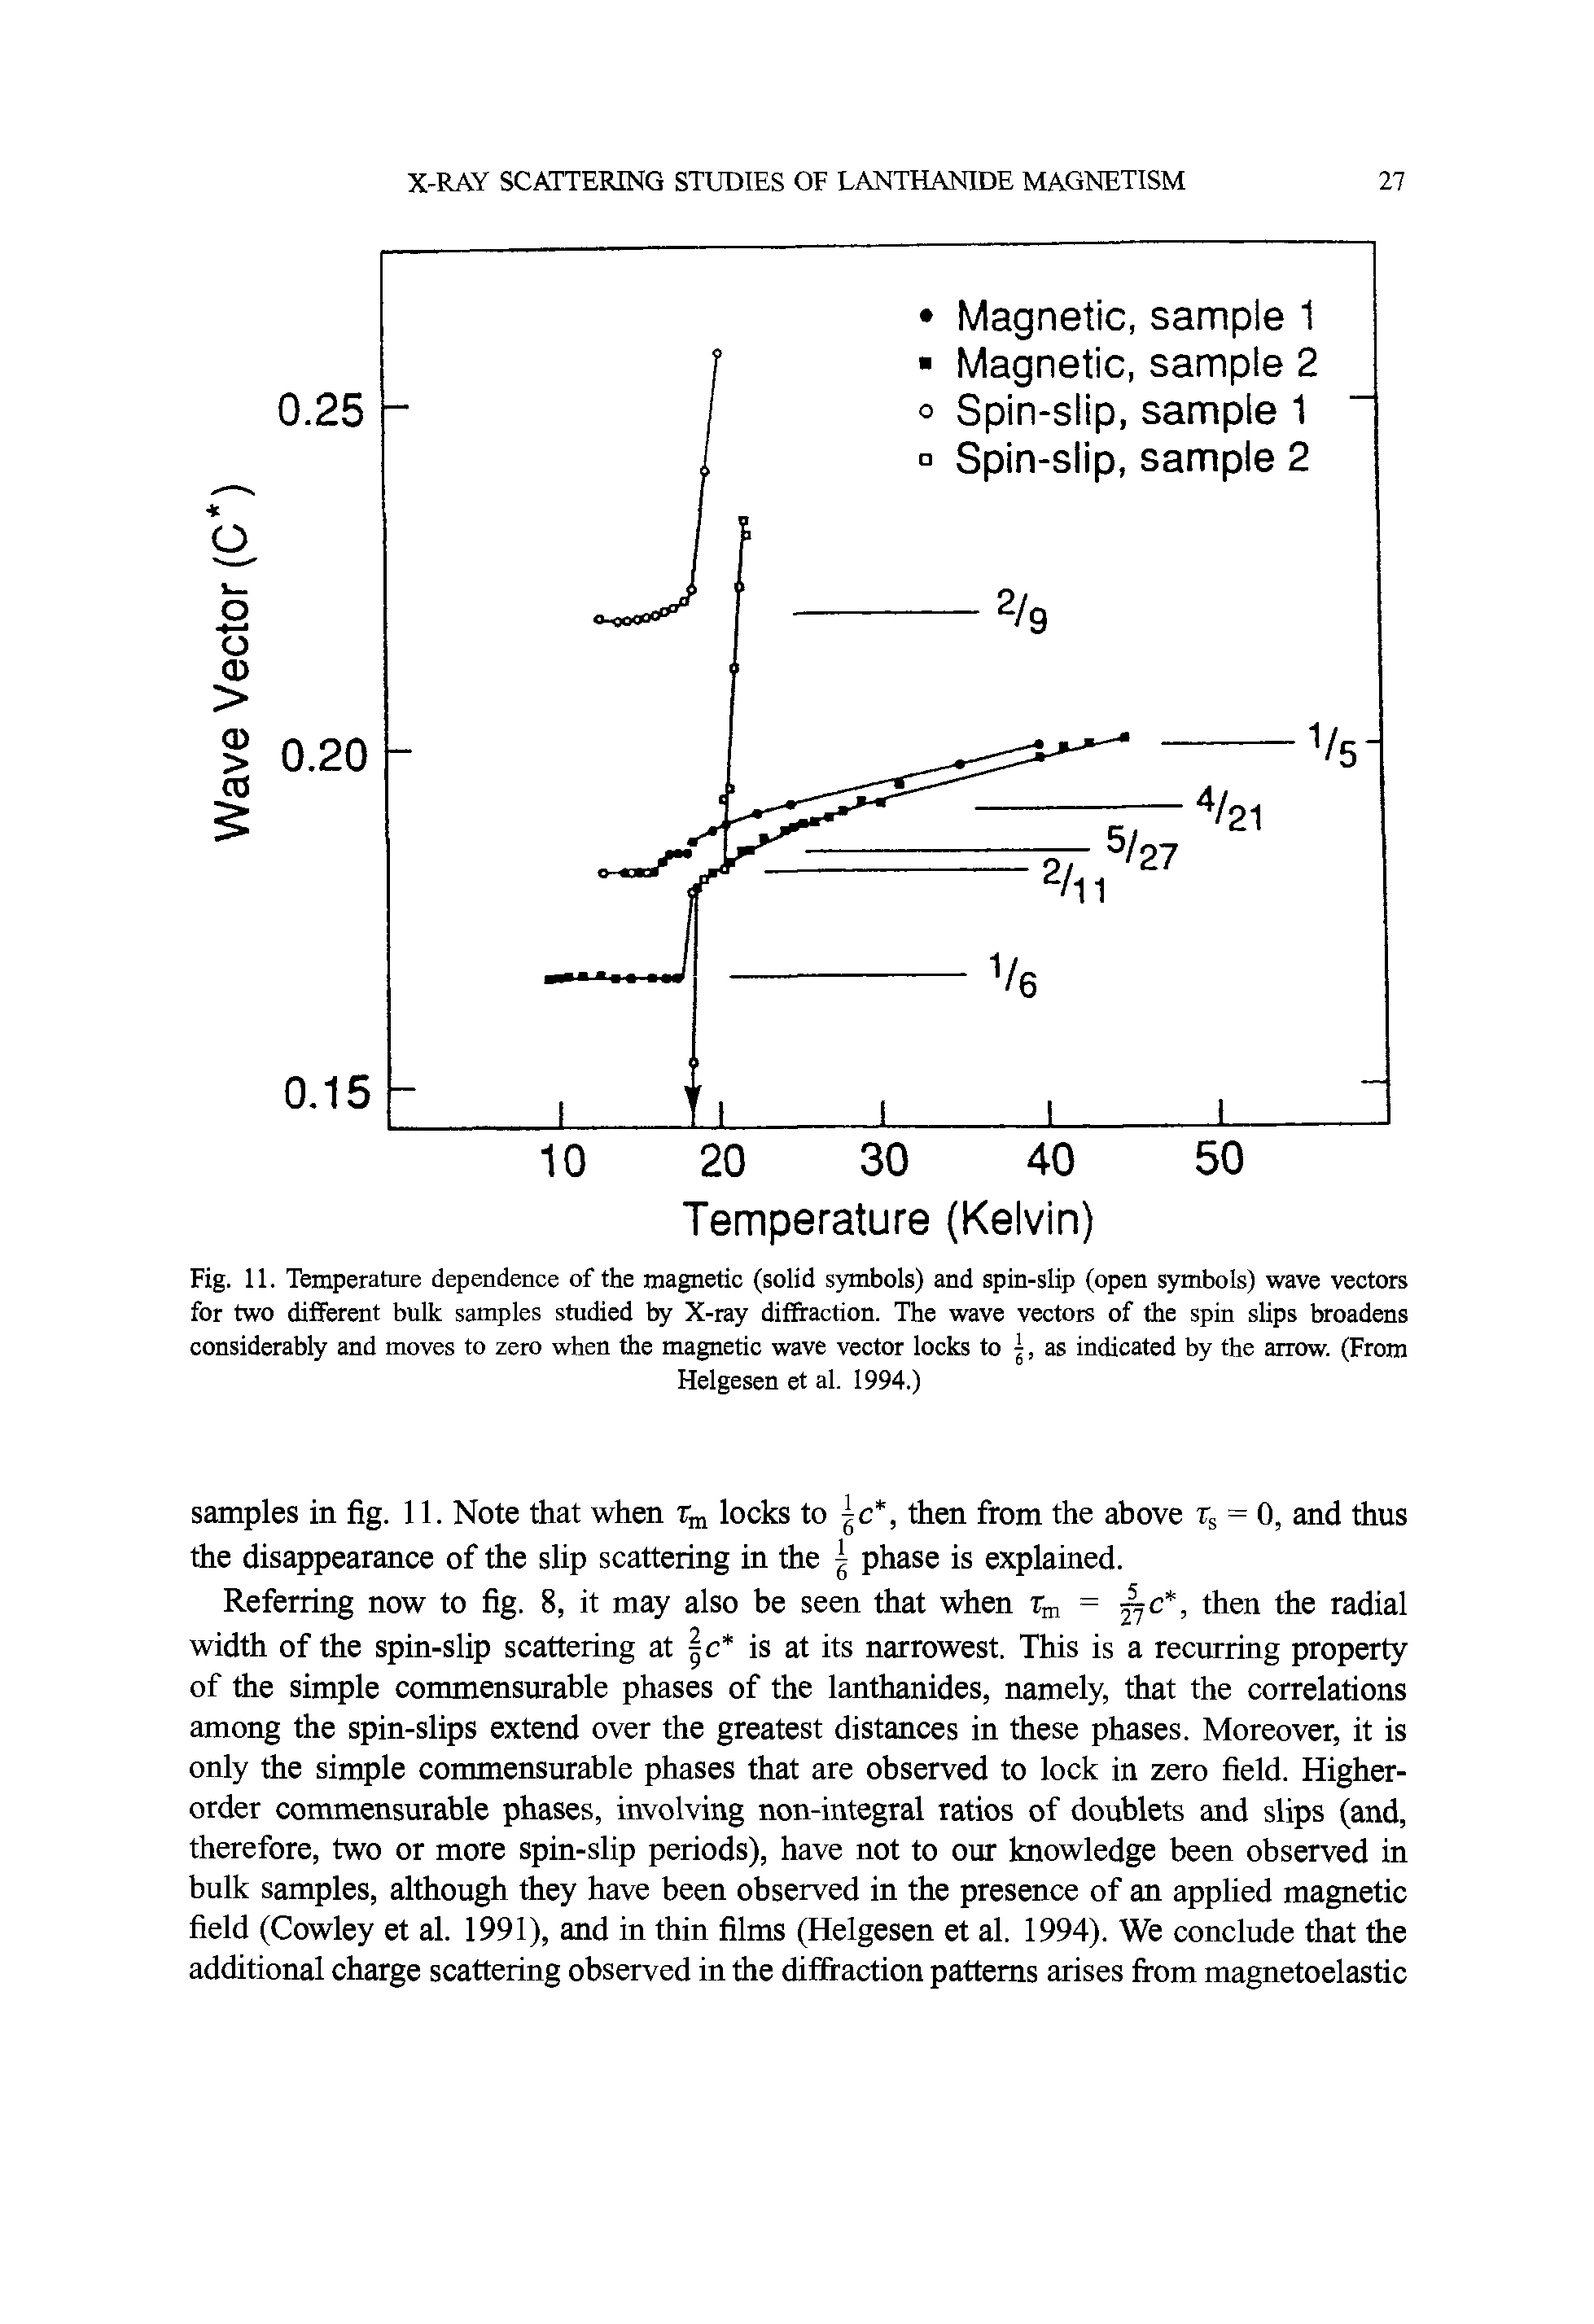 Fig. 11. Temperature dependence of the magnetic (solid symbols) and spin-slip (open S5fmboIs) wave vectors for two different bulk samples studied by X-ray dif action. The wave vectors of the spin shps broadens considerably and moves to zero when the magnetic wave vector locks to as indicated by the arrow. (From...